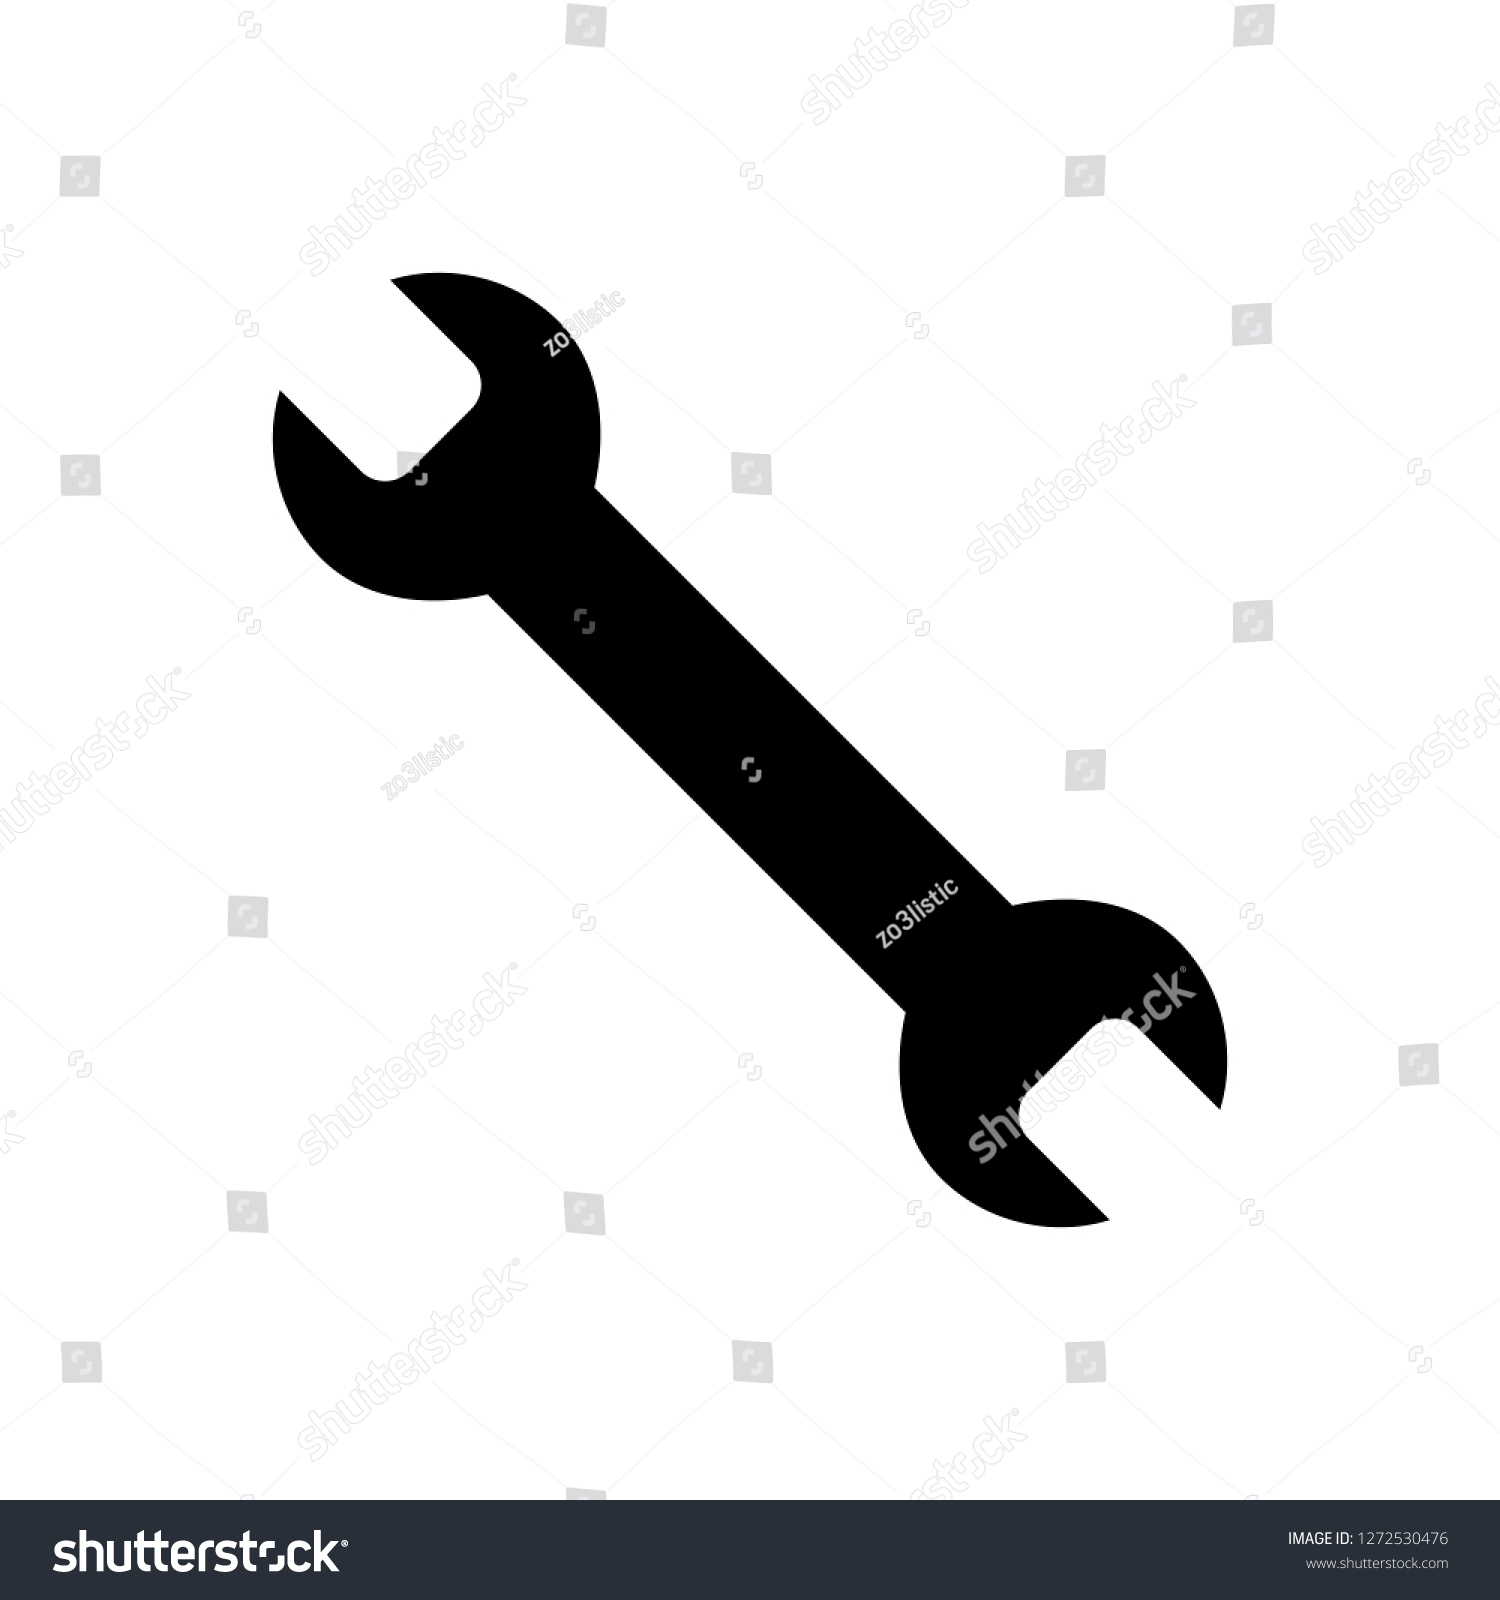 Repair icon. Wrench icon. Settings icon isolated
 #1272530476